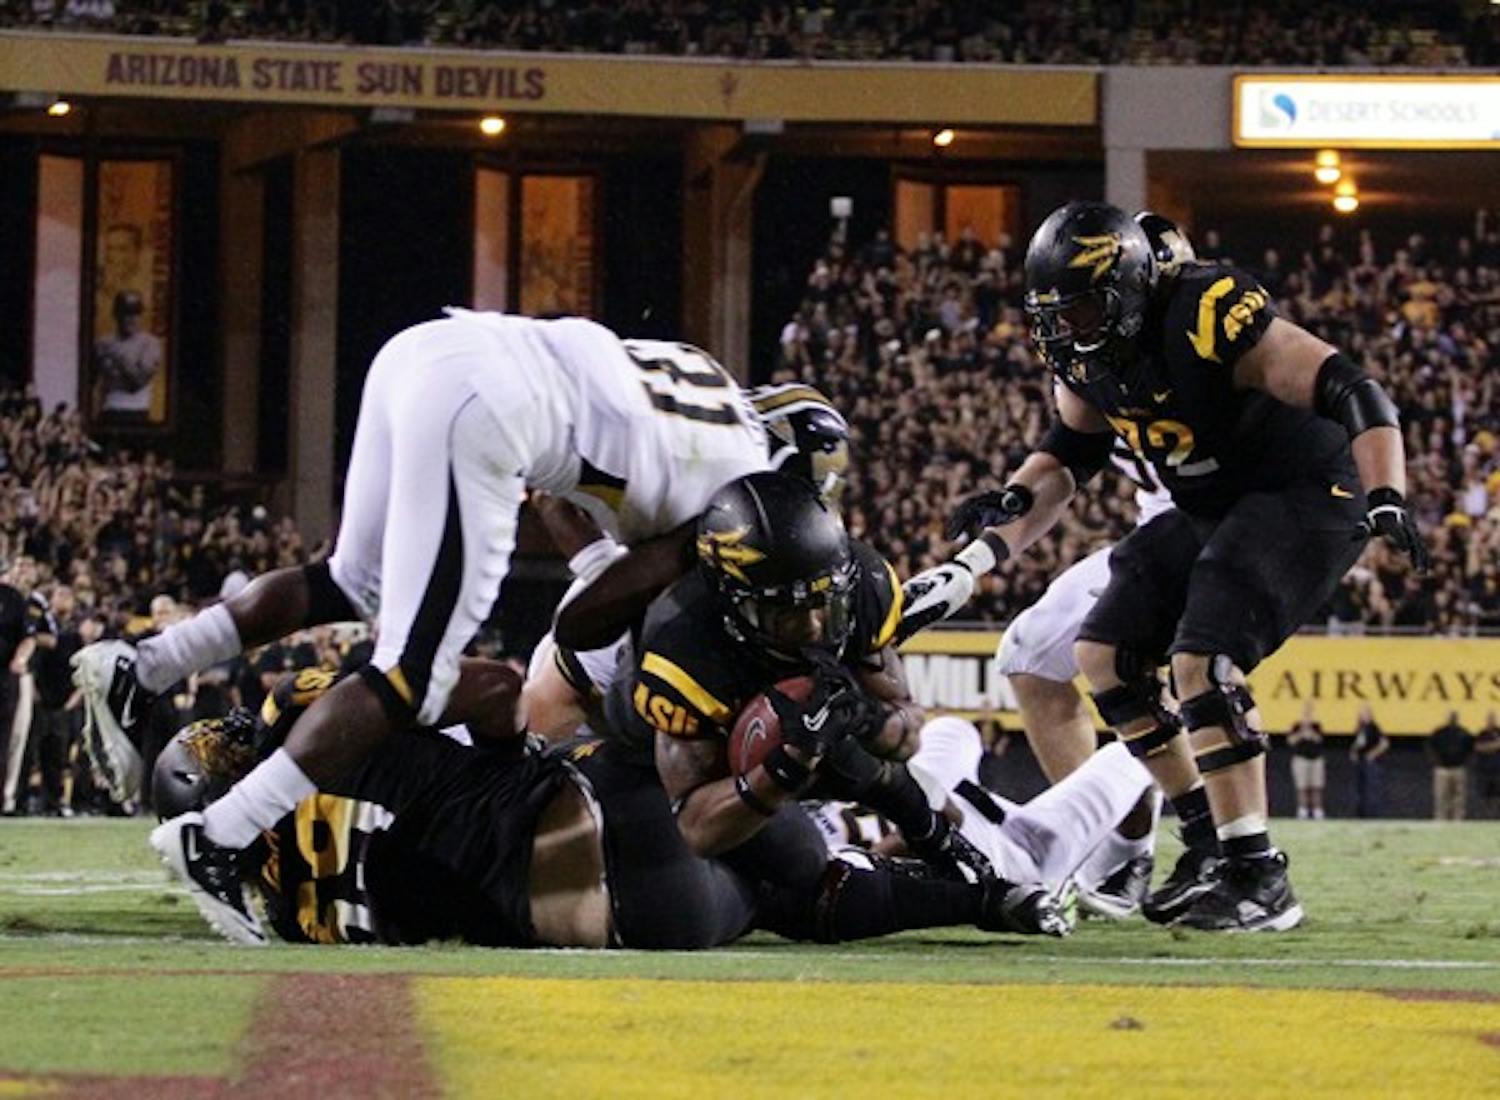 REACHING FOR IT: ASU junior wide reciever Jamal Miles stretches across the goal line for the game-winning touchdown in overtime against Mizzou. (Photo by Beth Easterbrook)